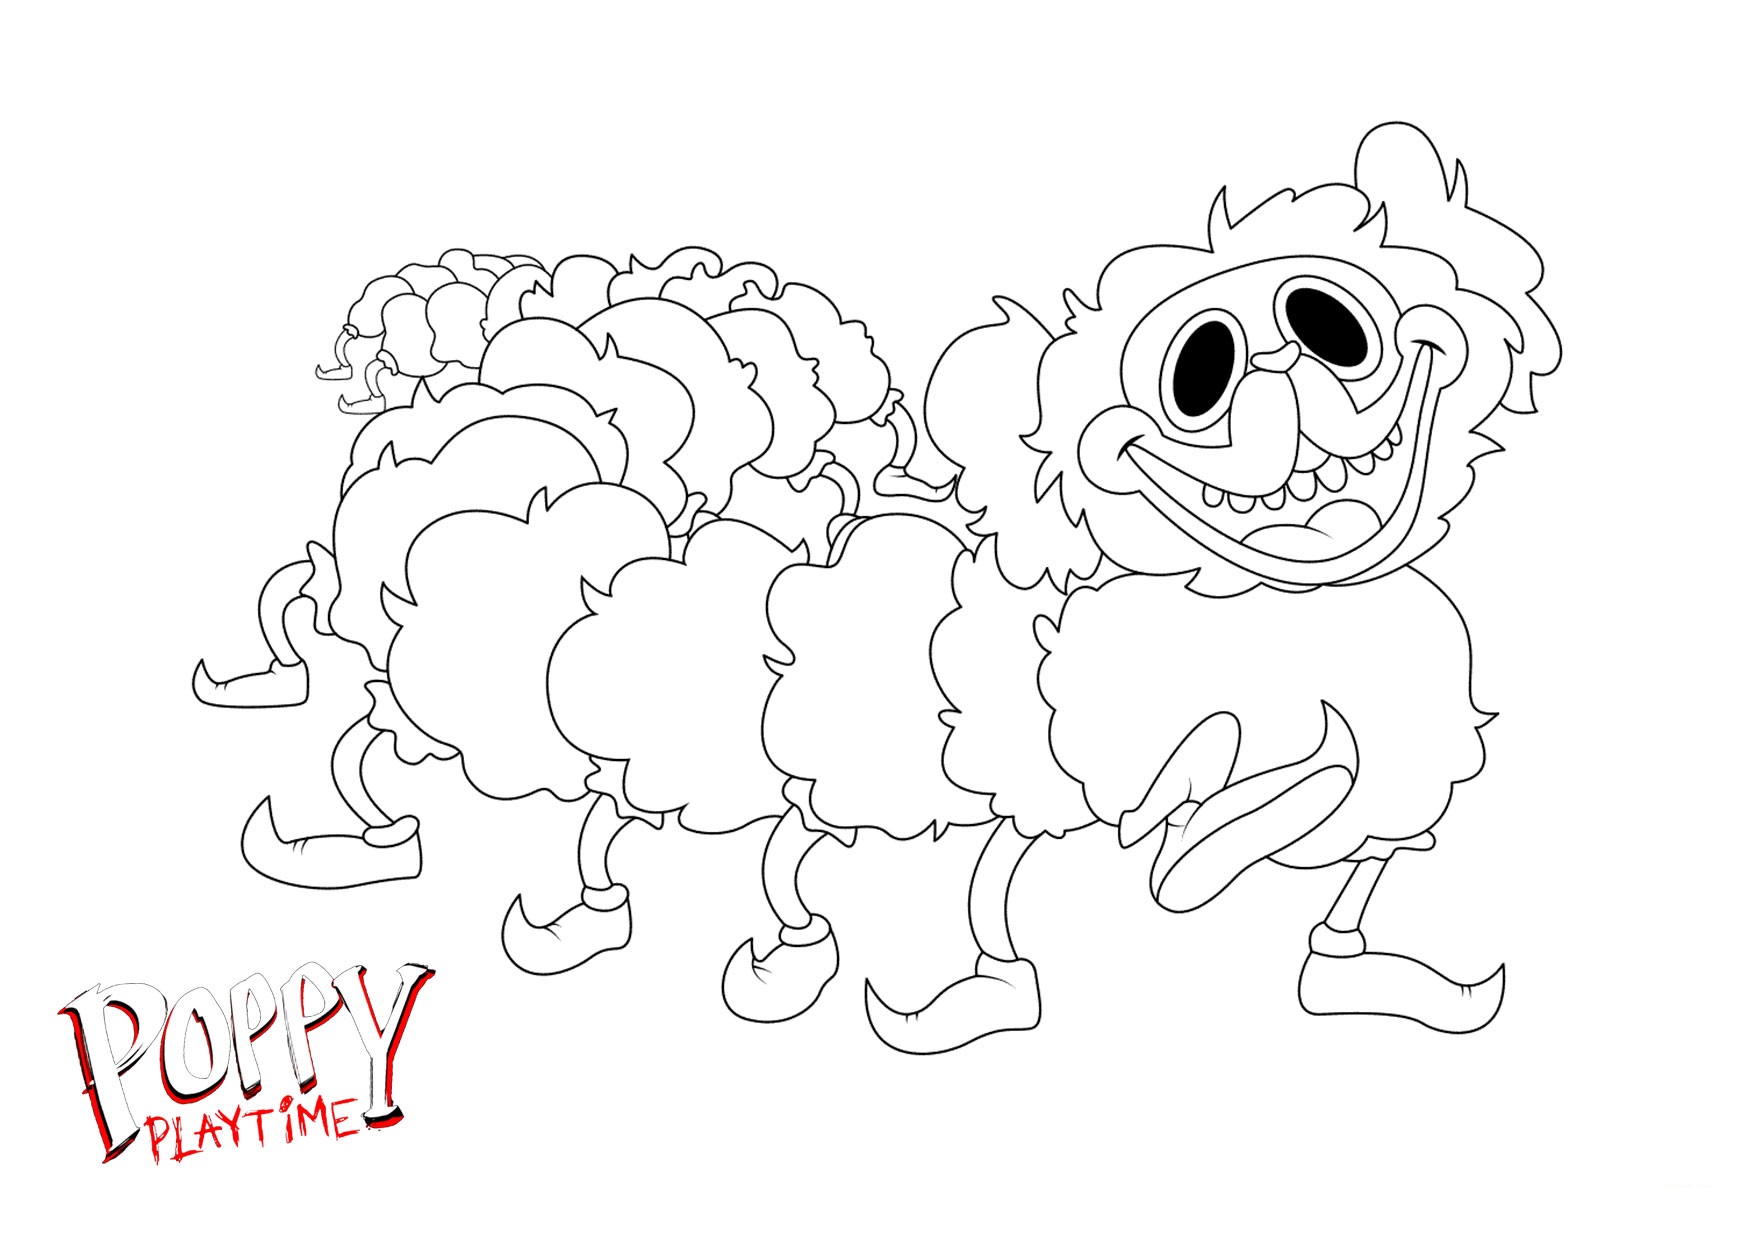 PJ Pug A Pillar Pug Caterpillar Poppy Playtime Coloring Pages